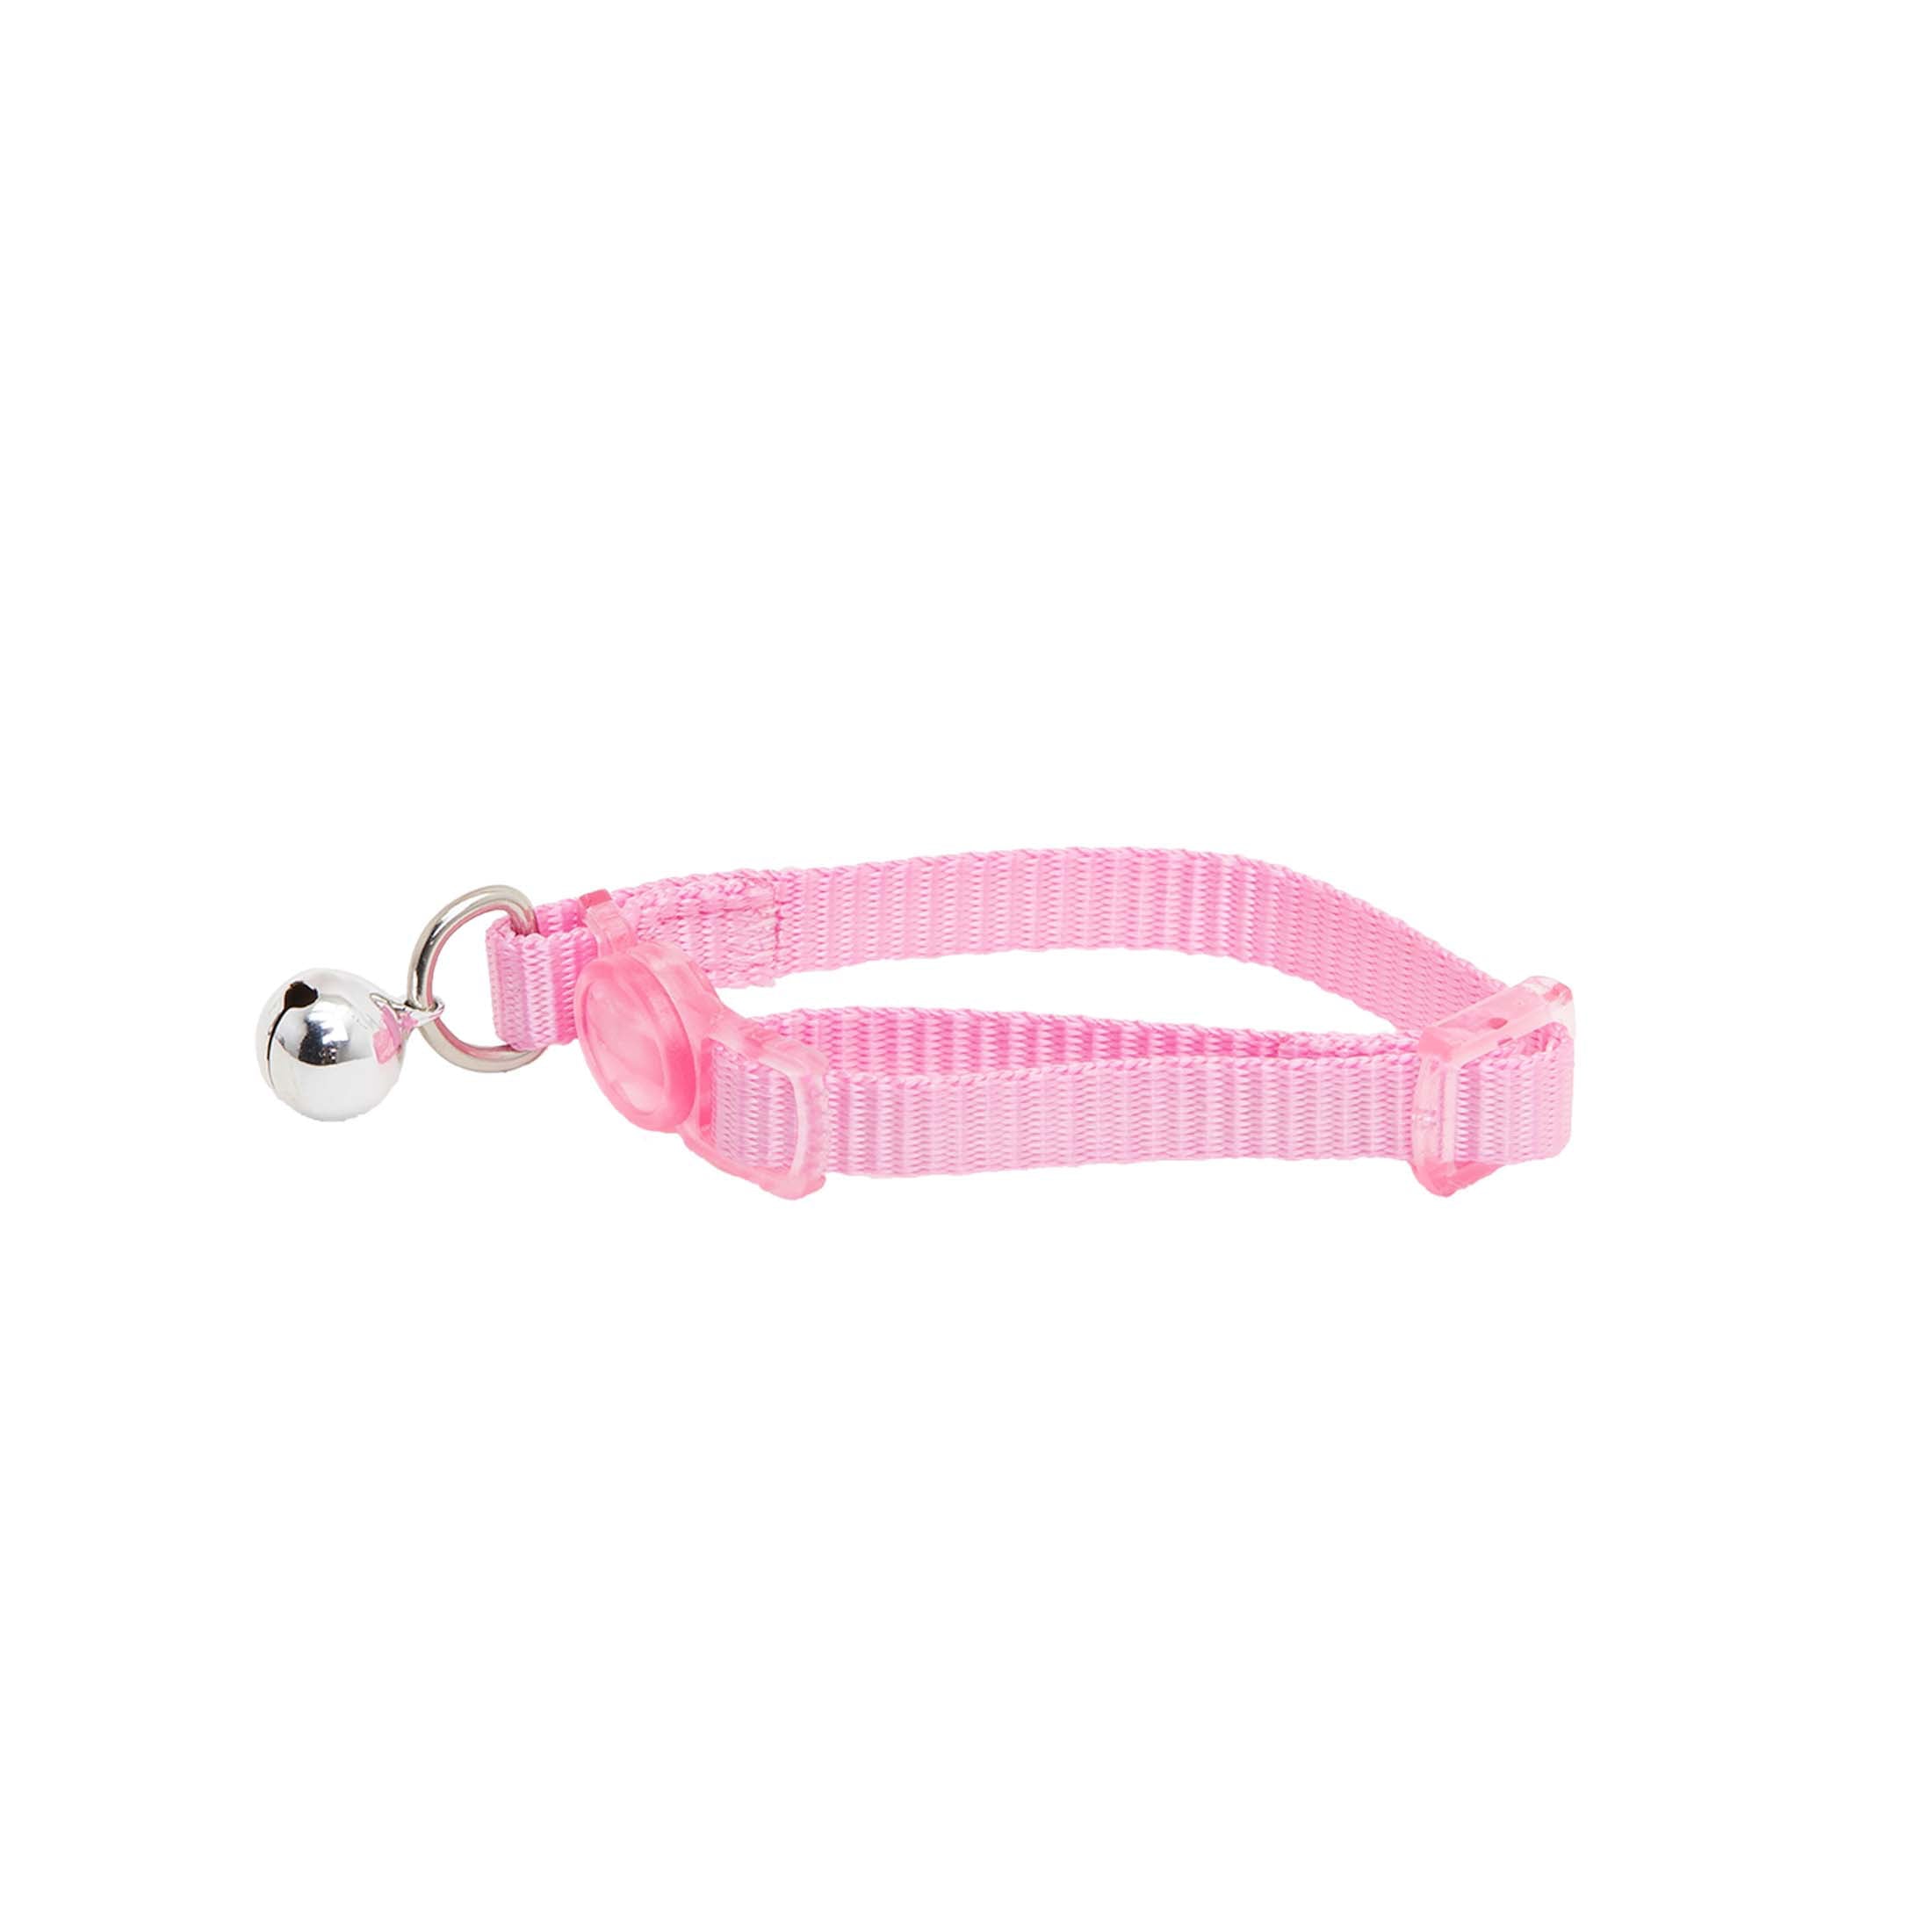 Wholesale prices with free shipping all over United States Vibrant Life 2-Pack Kitten Collar Pink Wave Pattern and Solid Pink, Multi-color, One Size - Steven Deals